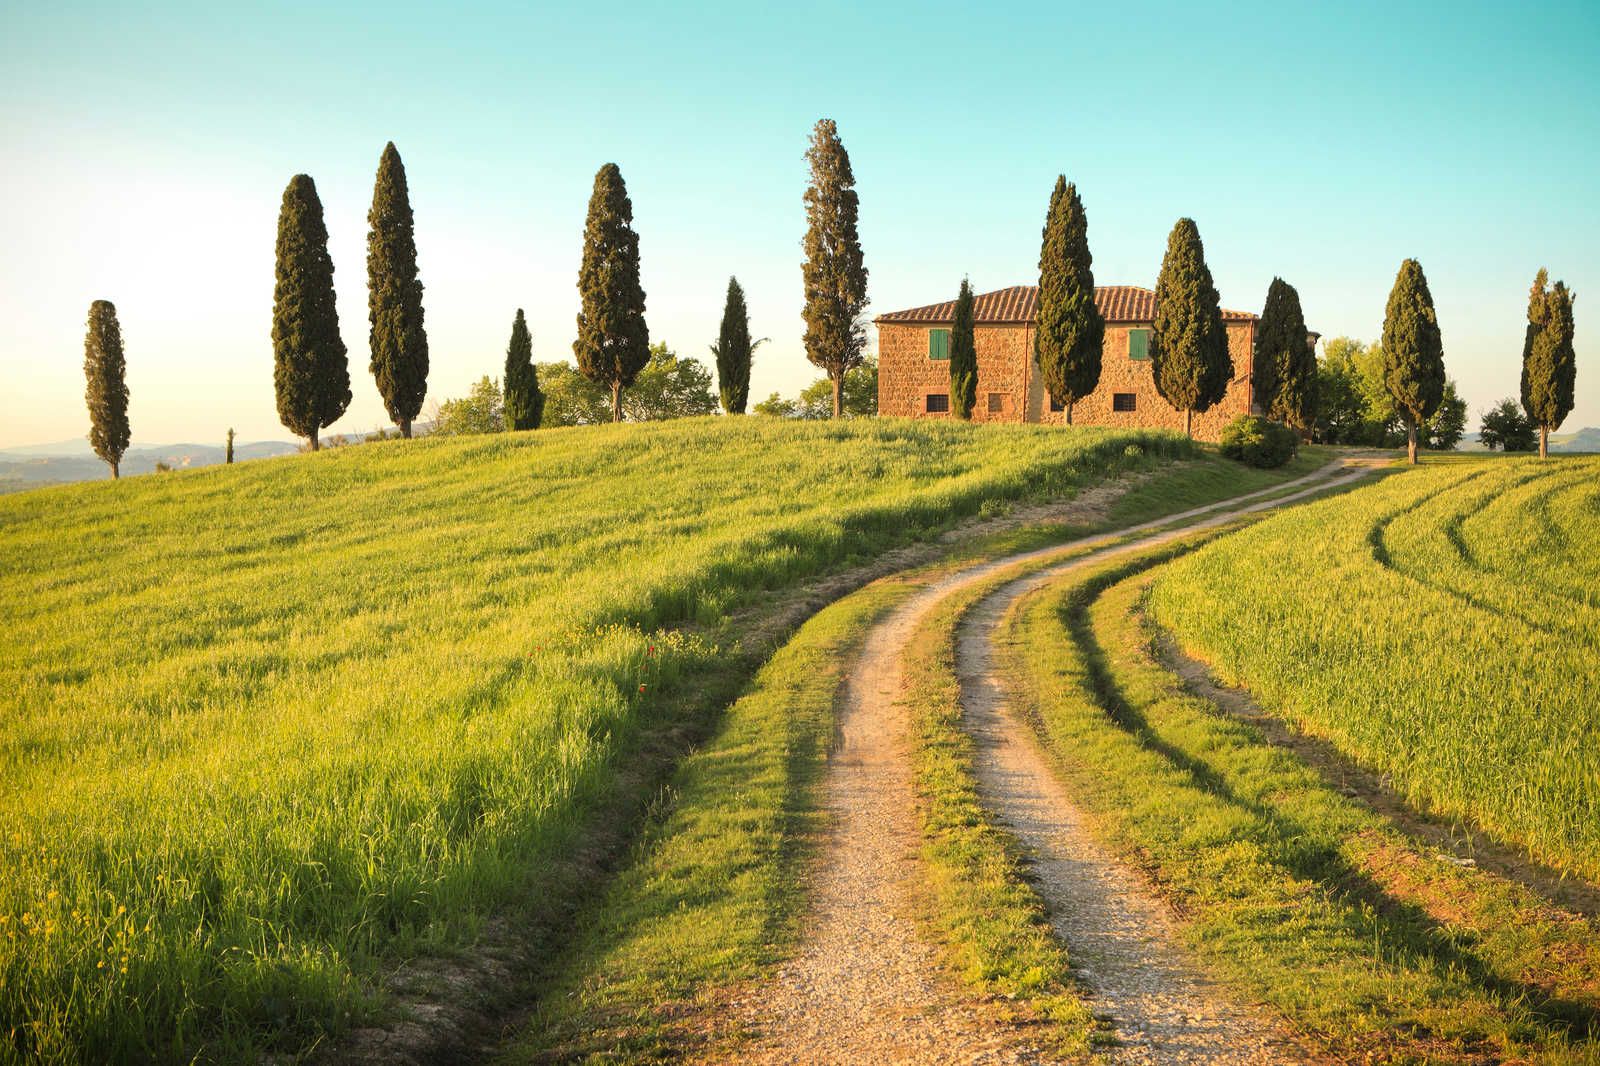             Canvas painting Villa with cypresses in Tuscany - 1.20 m x 0.80 m
        